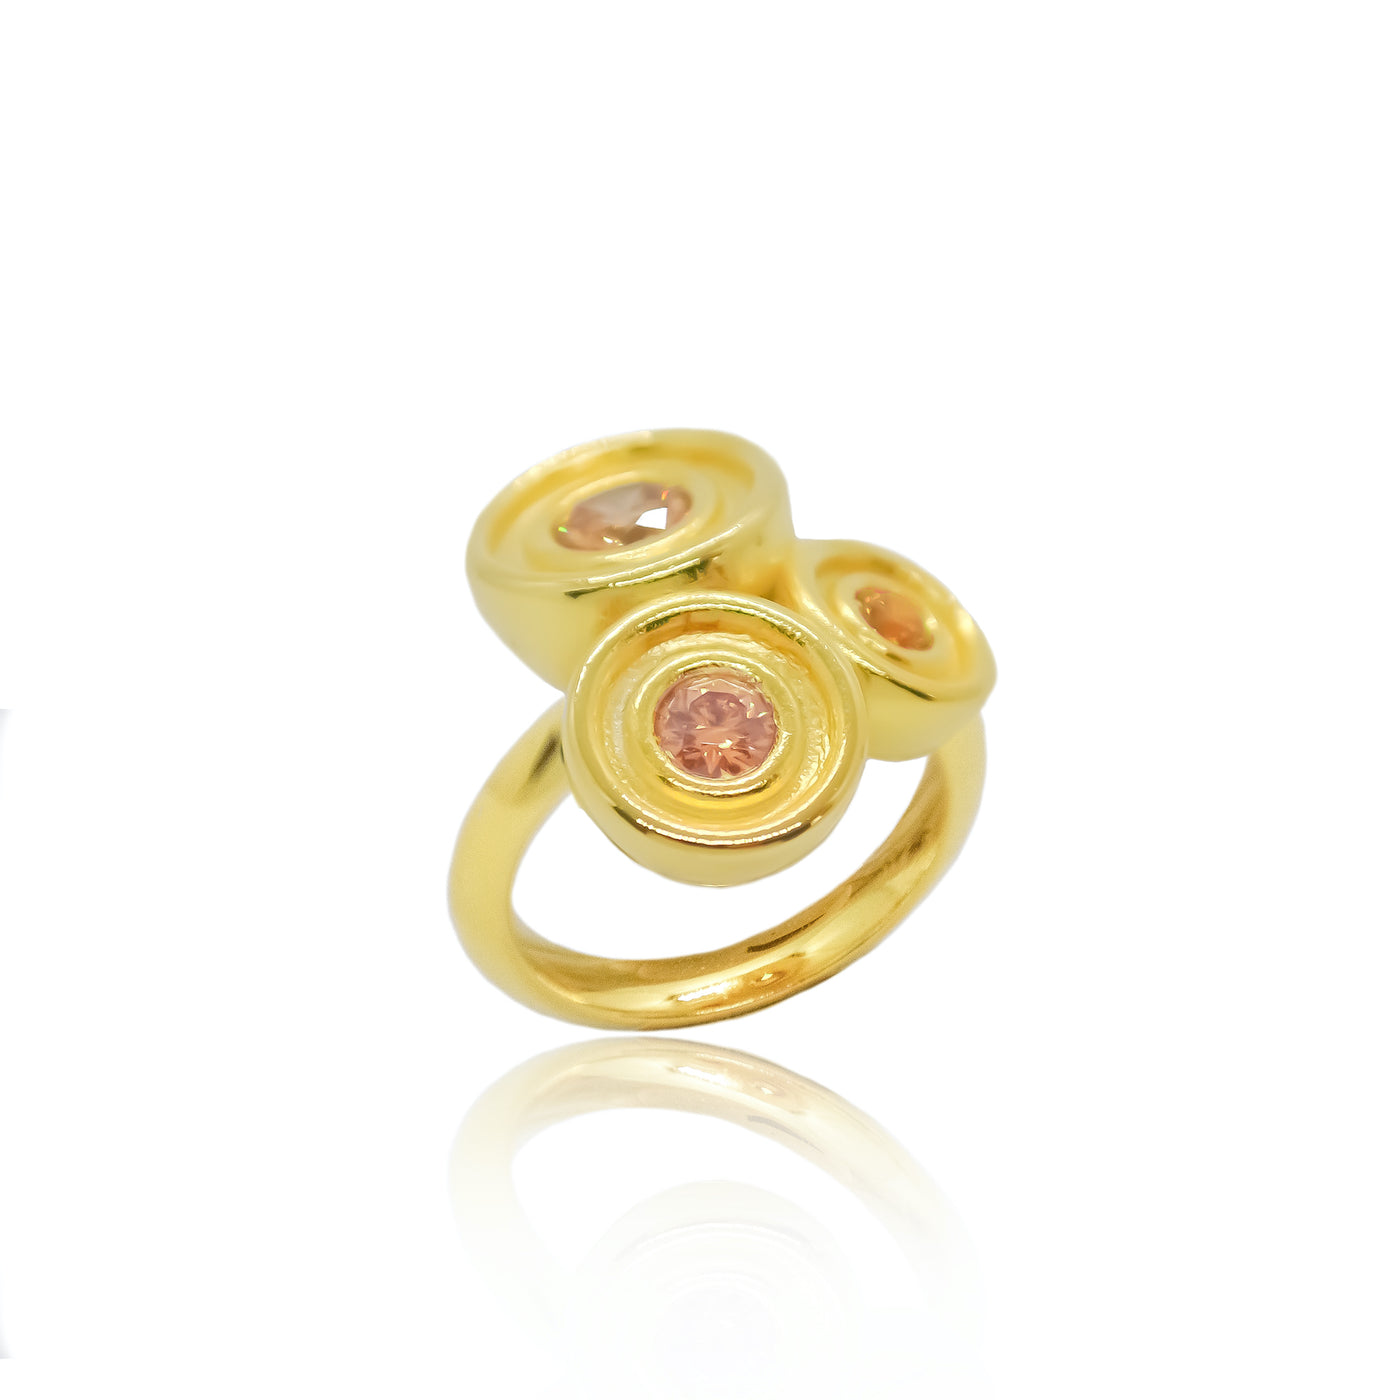 Cocktail ring in gold with champagne diamond, tourmaline and sapphire from Atelier ORMAN